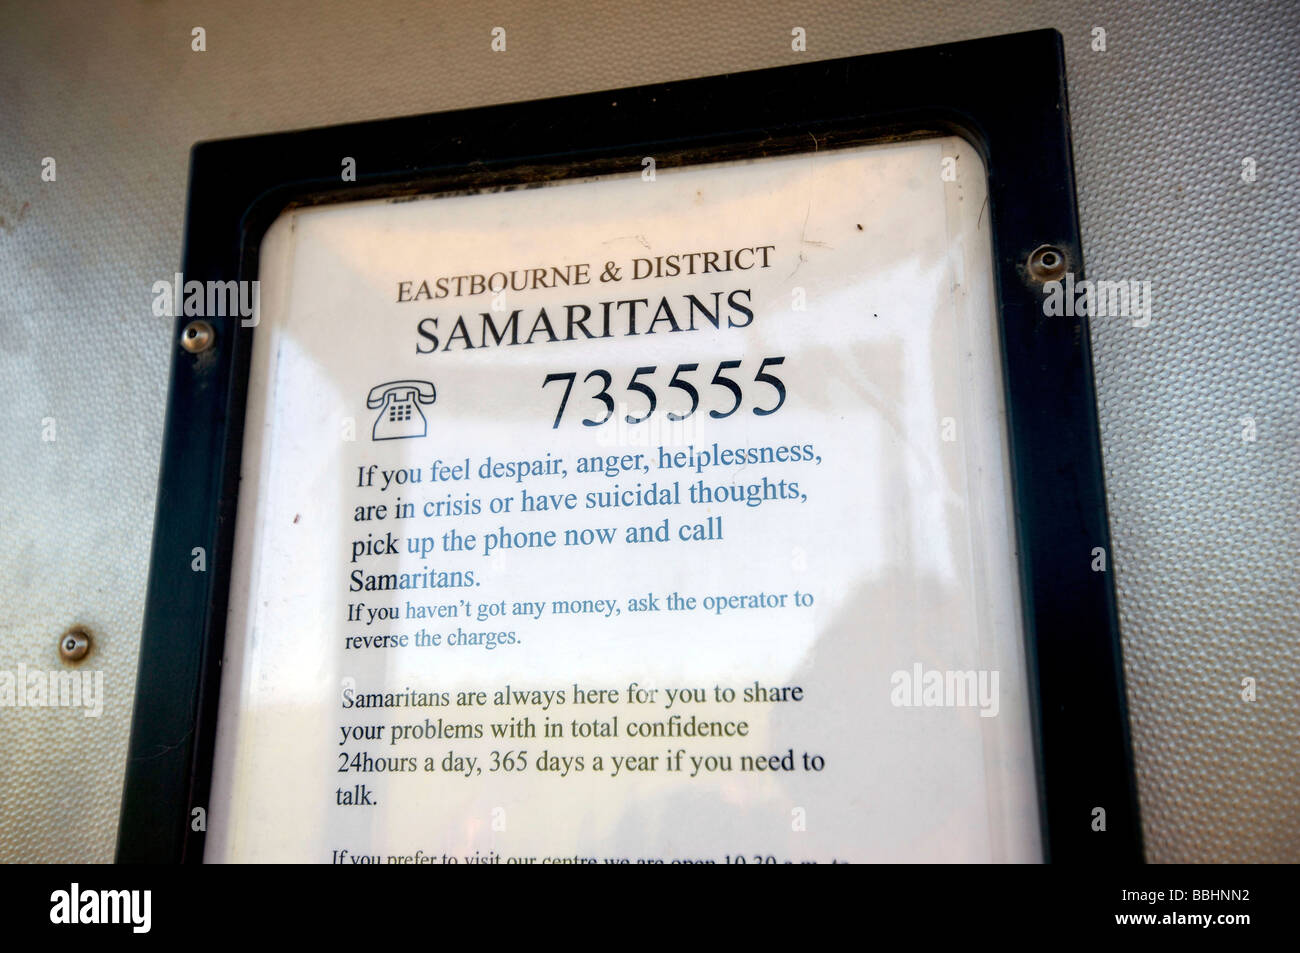 Contact details for The Samaritans around and in the public telephone box at Beachy Head, a notorious suicide spot. Stock Photo